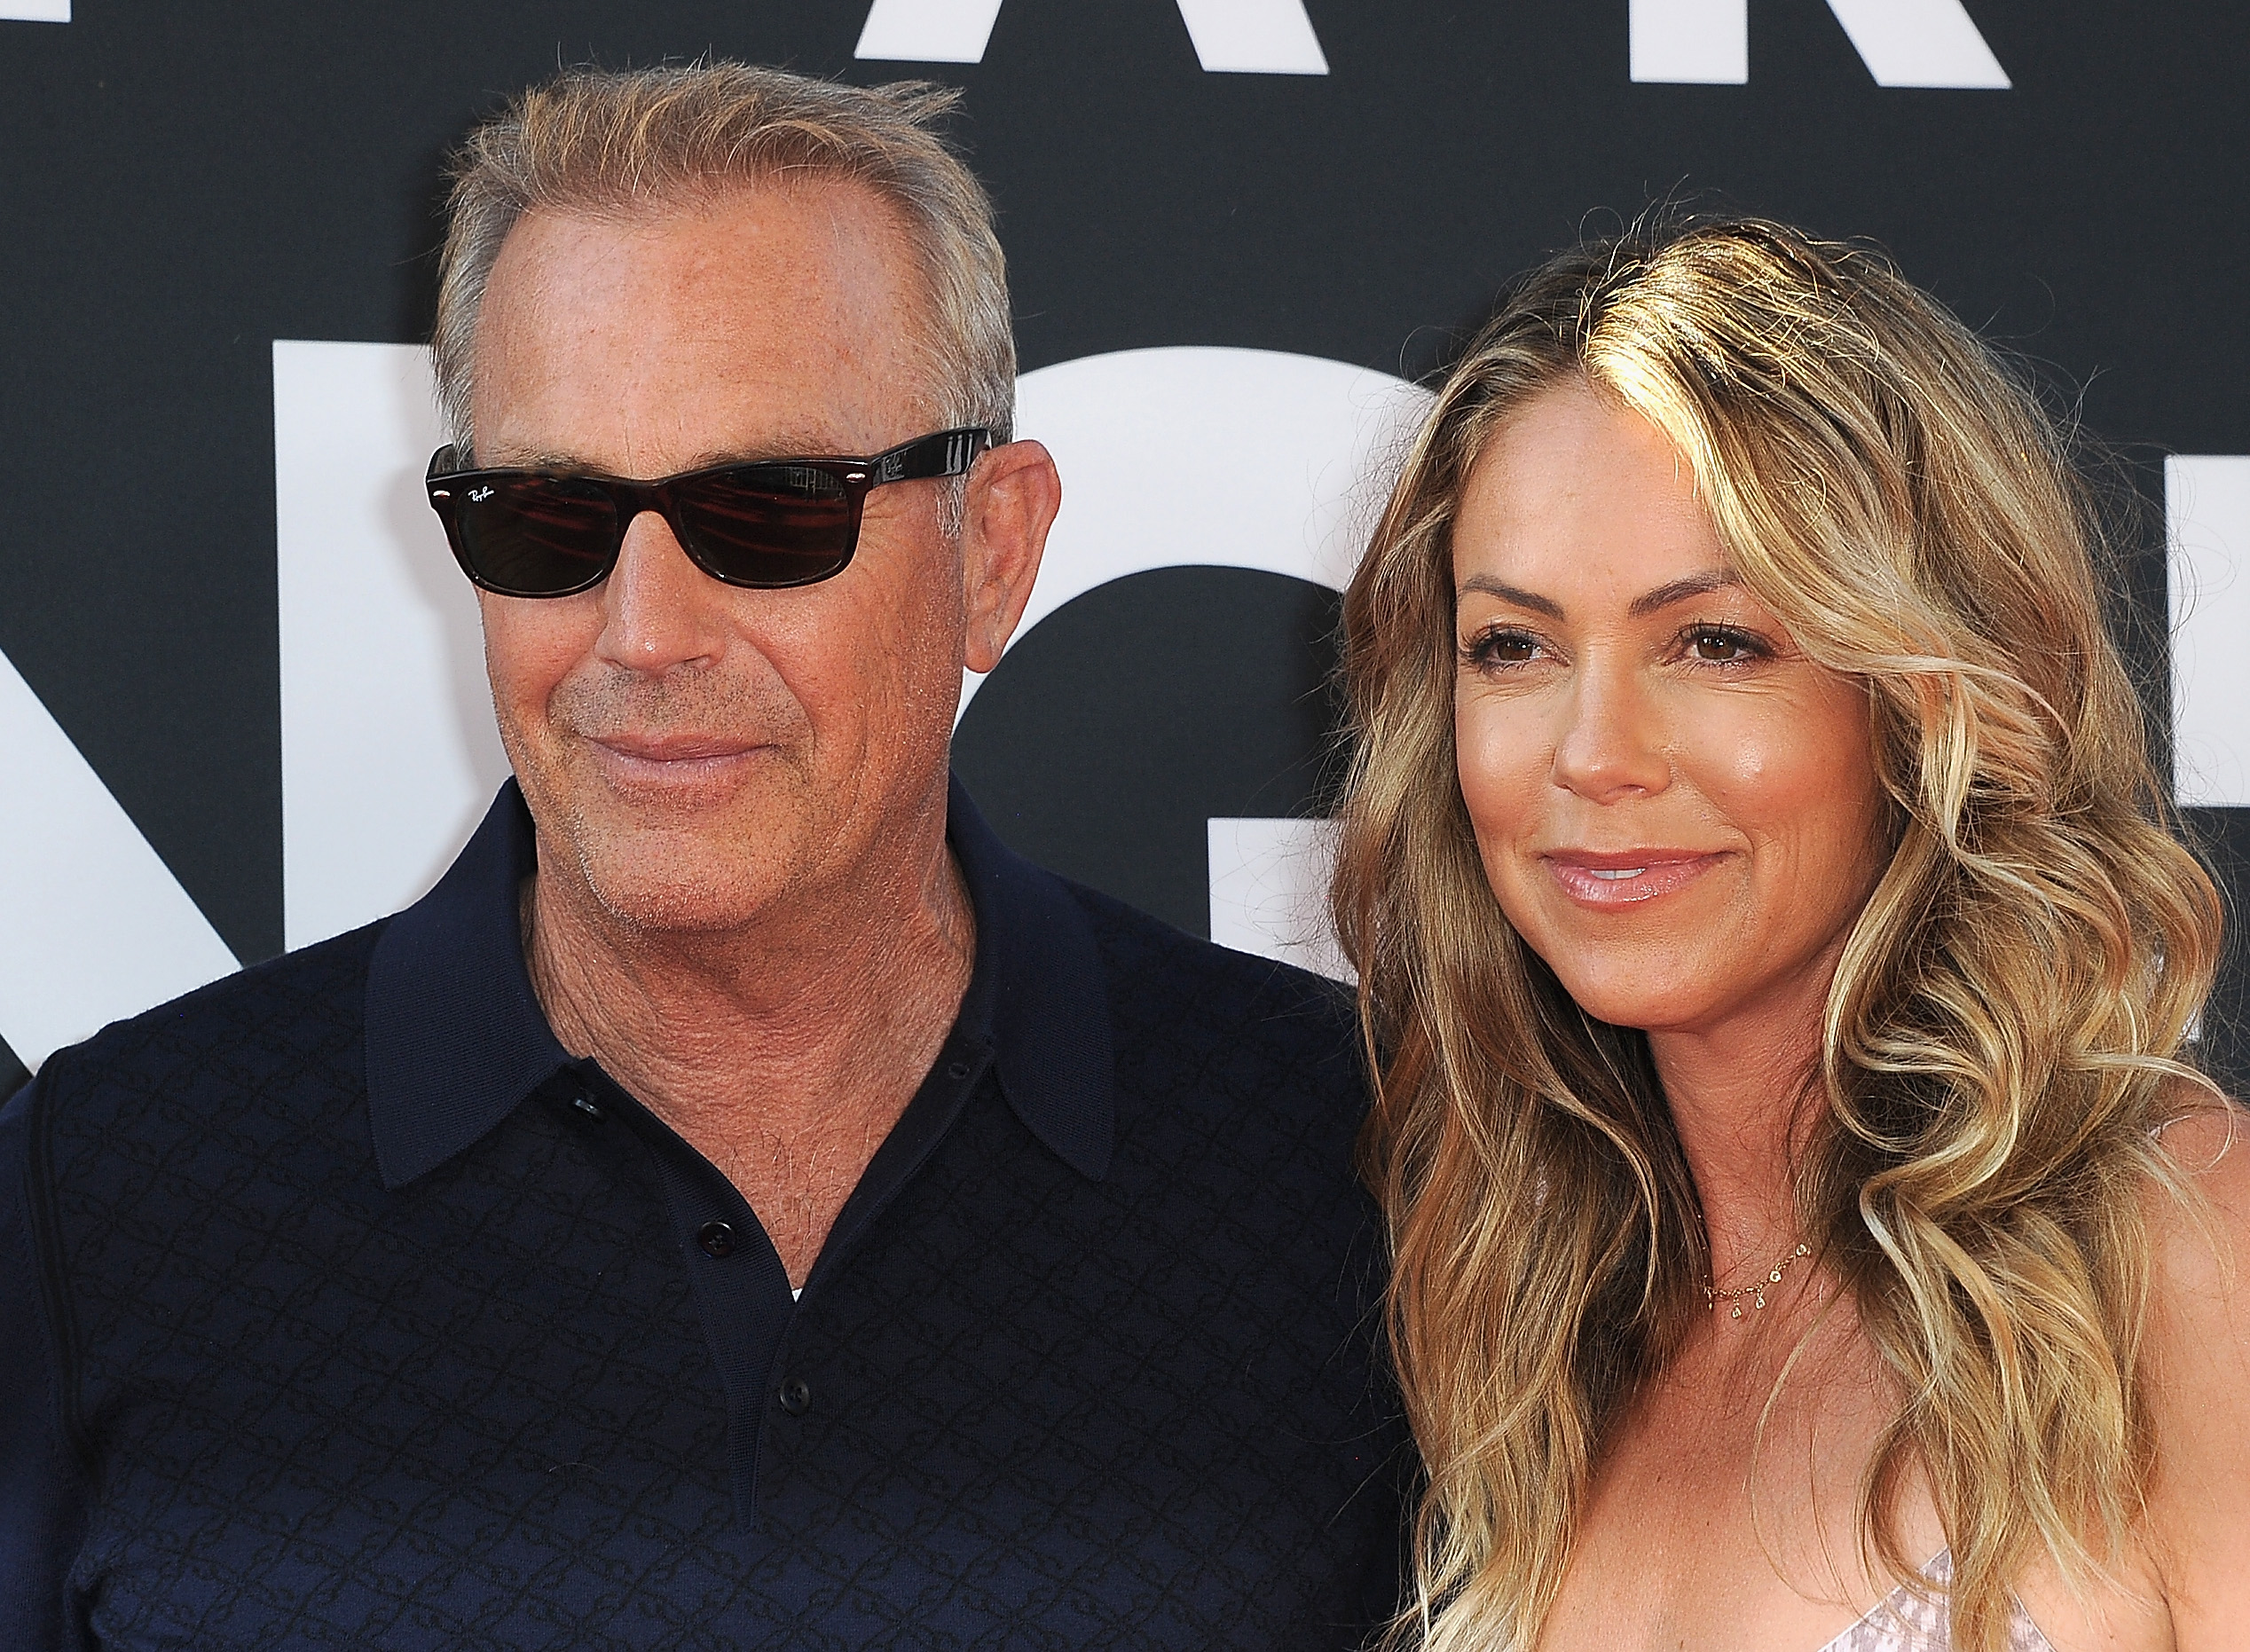 Kevin Costner and Christine Baumgartner pose at the Premiere Of 20th Century Fox's "The Art Of Racing In The Rain" at El Capitan Theatre on August 1, 2019, in Los Angeles, California | Source: Getty Images